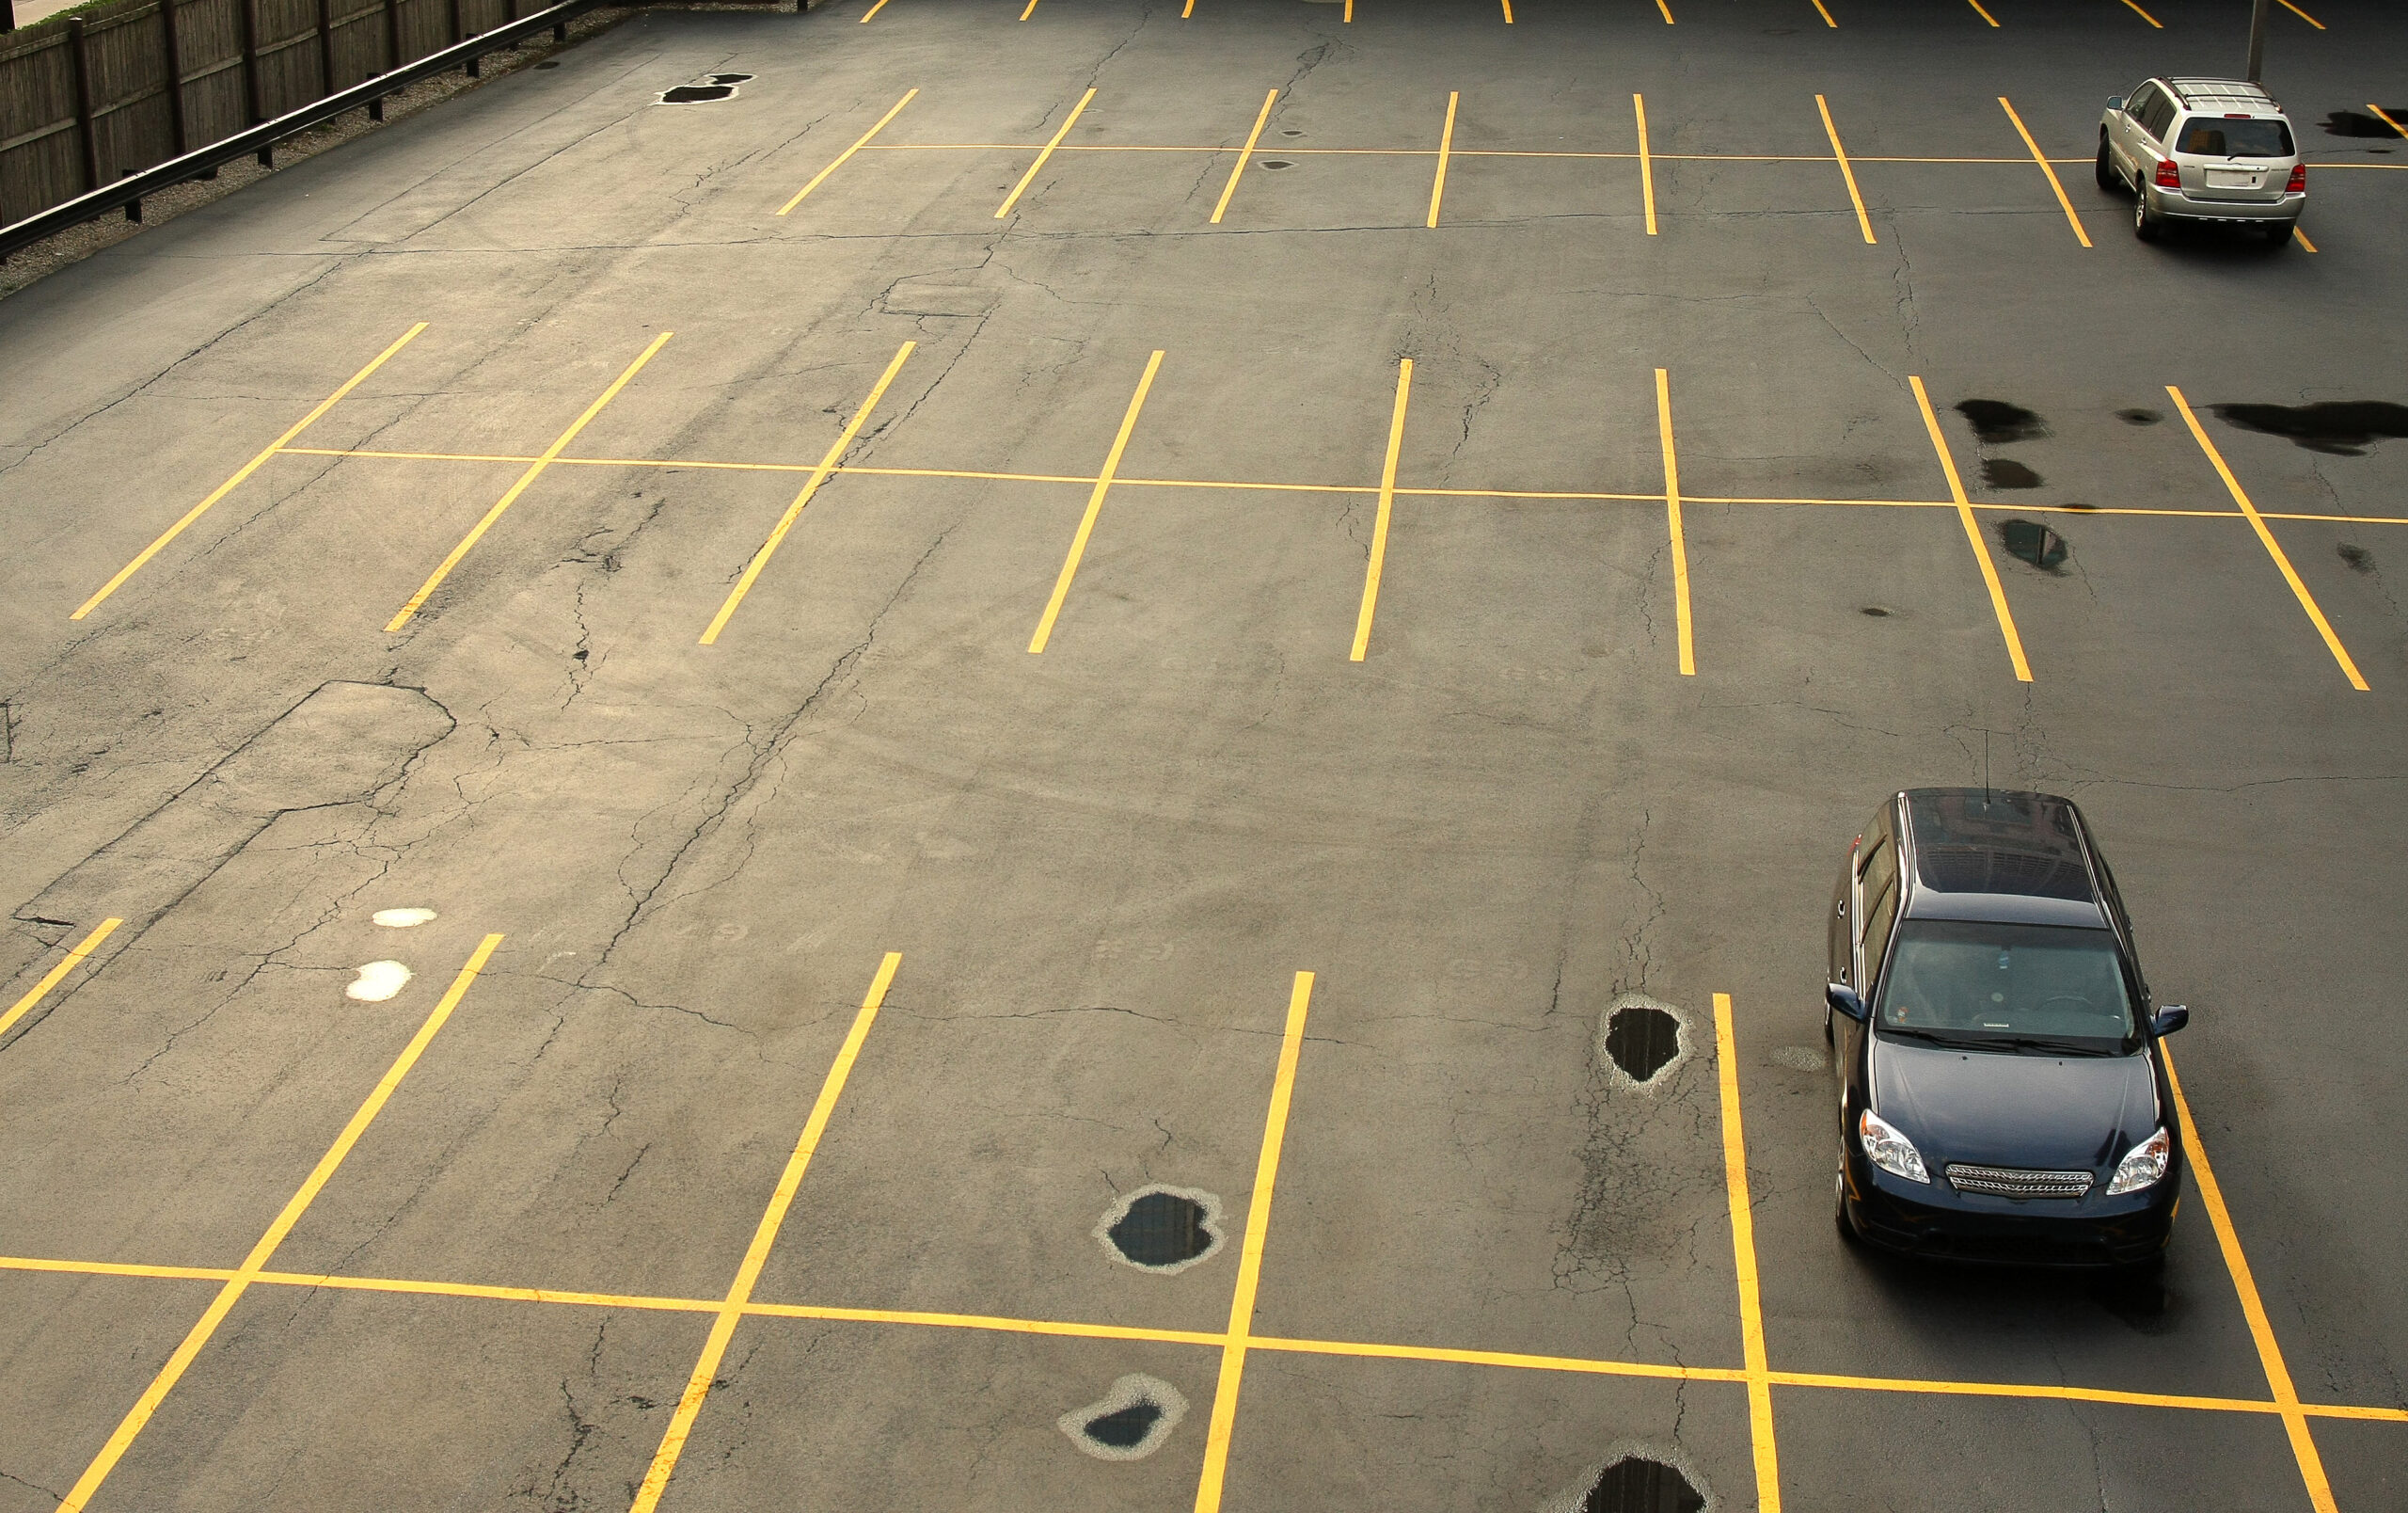 Aerial view of a mostly empty parking lot with a few cars